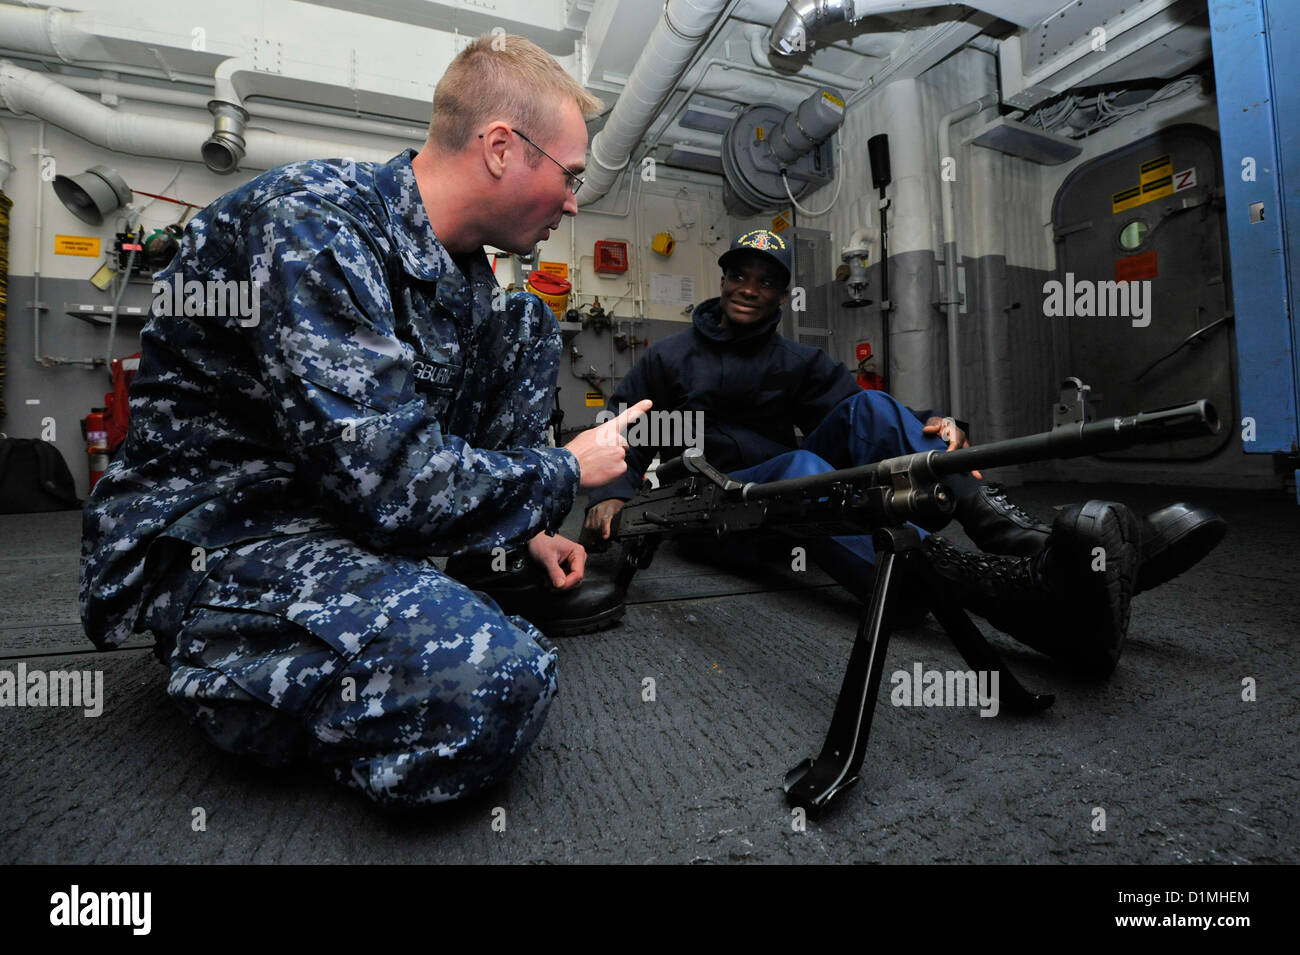 Gunner’s Mate 2nd Class Daniel Pangburn, left, instructs Ship’s Serviceman 3rd Class Komla Sapey in the proper operation of an M240B machine gun during weapons familiarization aboard the guided-missile destroyer USS Jason Dunham (DDG 109). Jason Dunham is deployed with the John C. Stennis Strike Group to the U.S. 5th Fleet area of responsibility conducting maritime security operations, theater security cooperation efforts and support missions for Operation Enduring Freedom..ARABIAN SEA (Dec.29, 2012)US Navy Photo Stock Photo